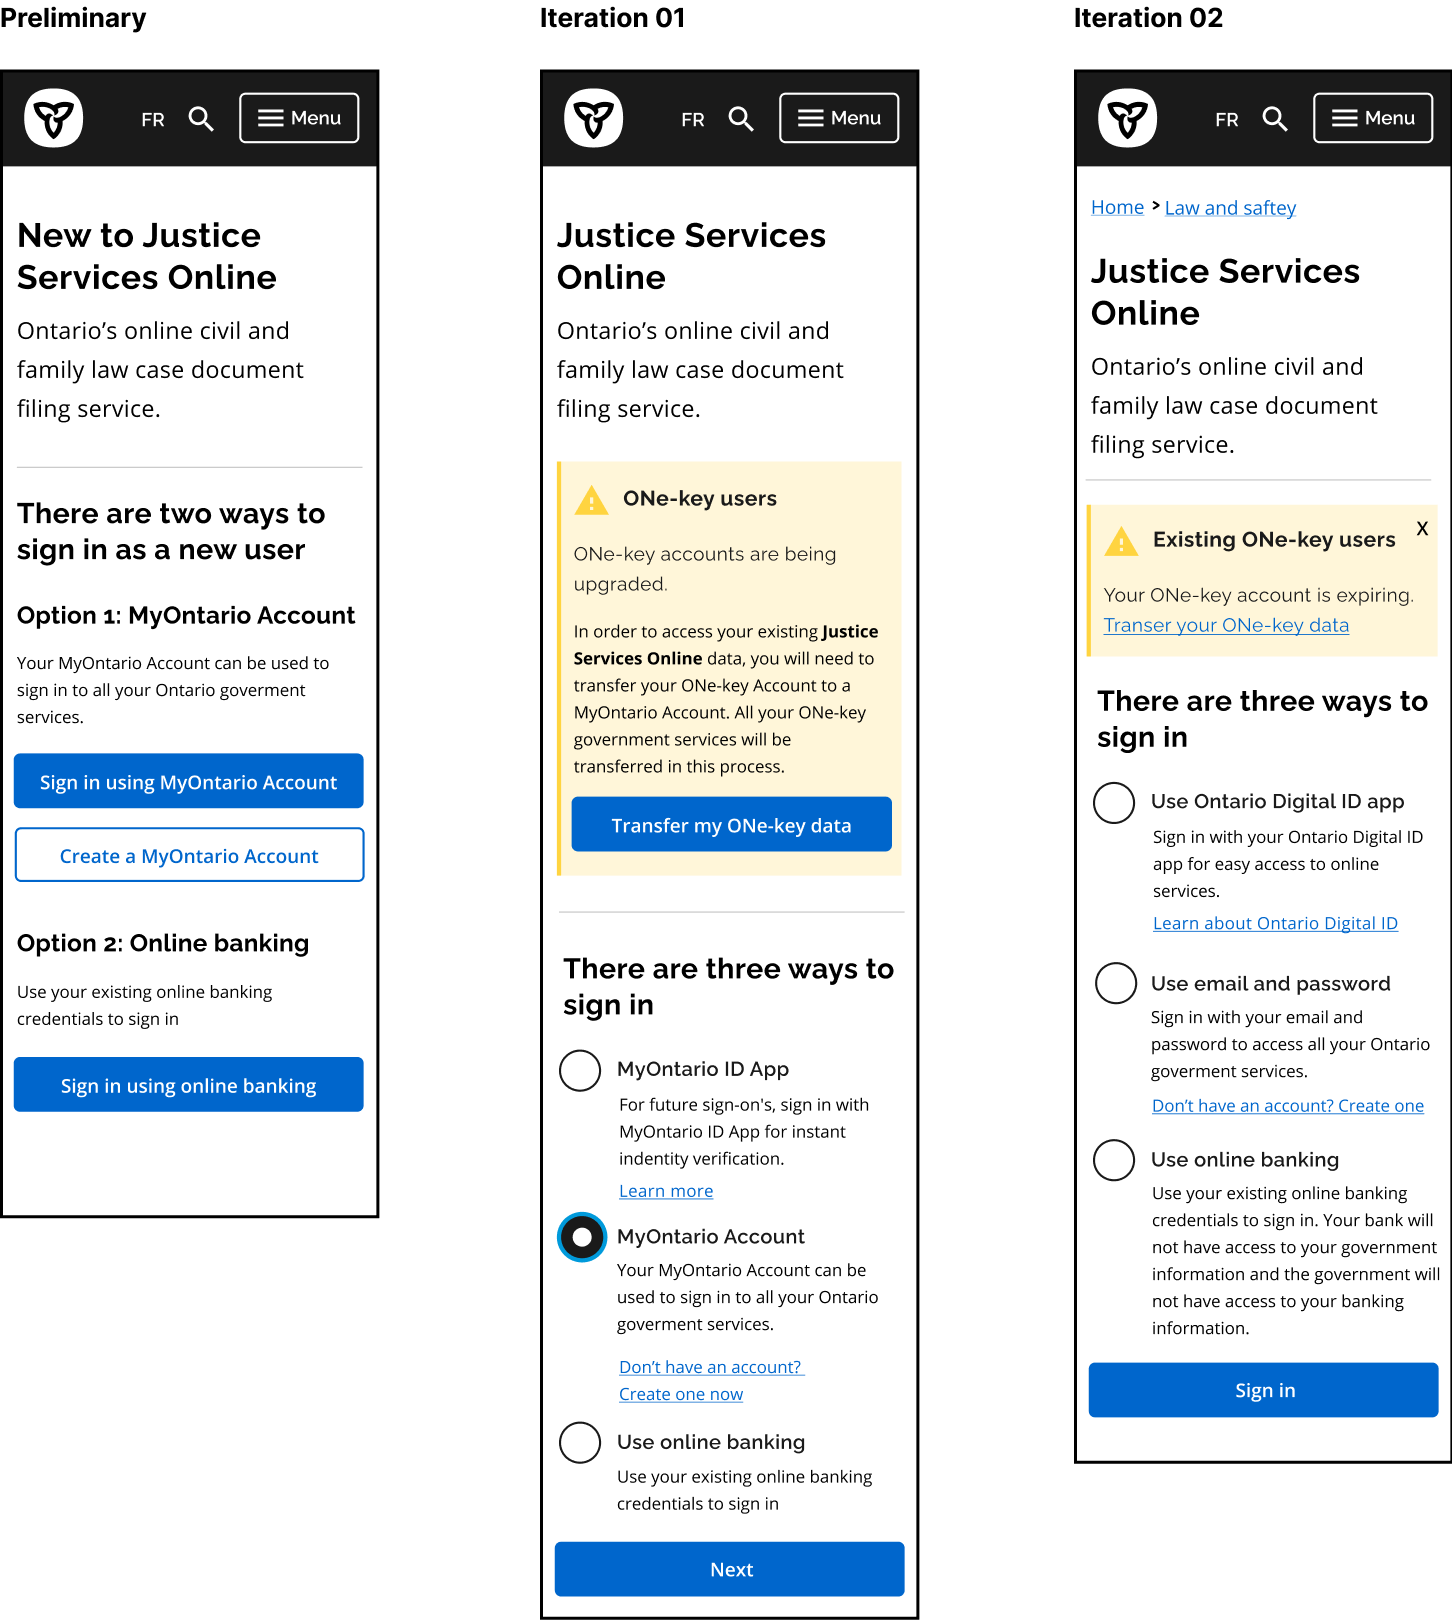 An image of the first and updated drafts of the landing page buttons